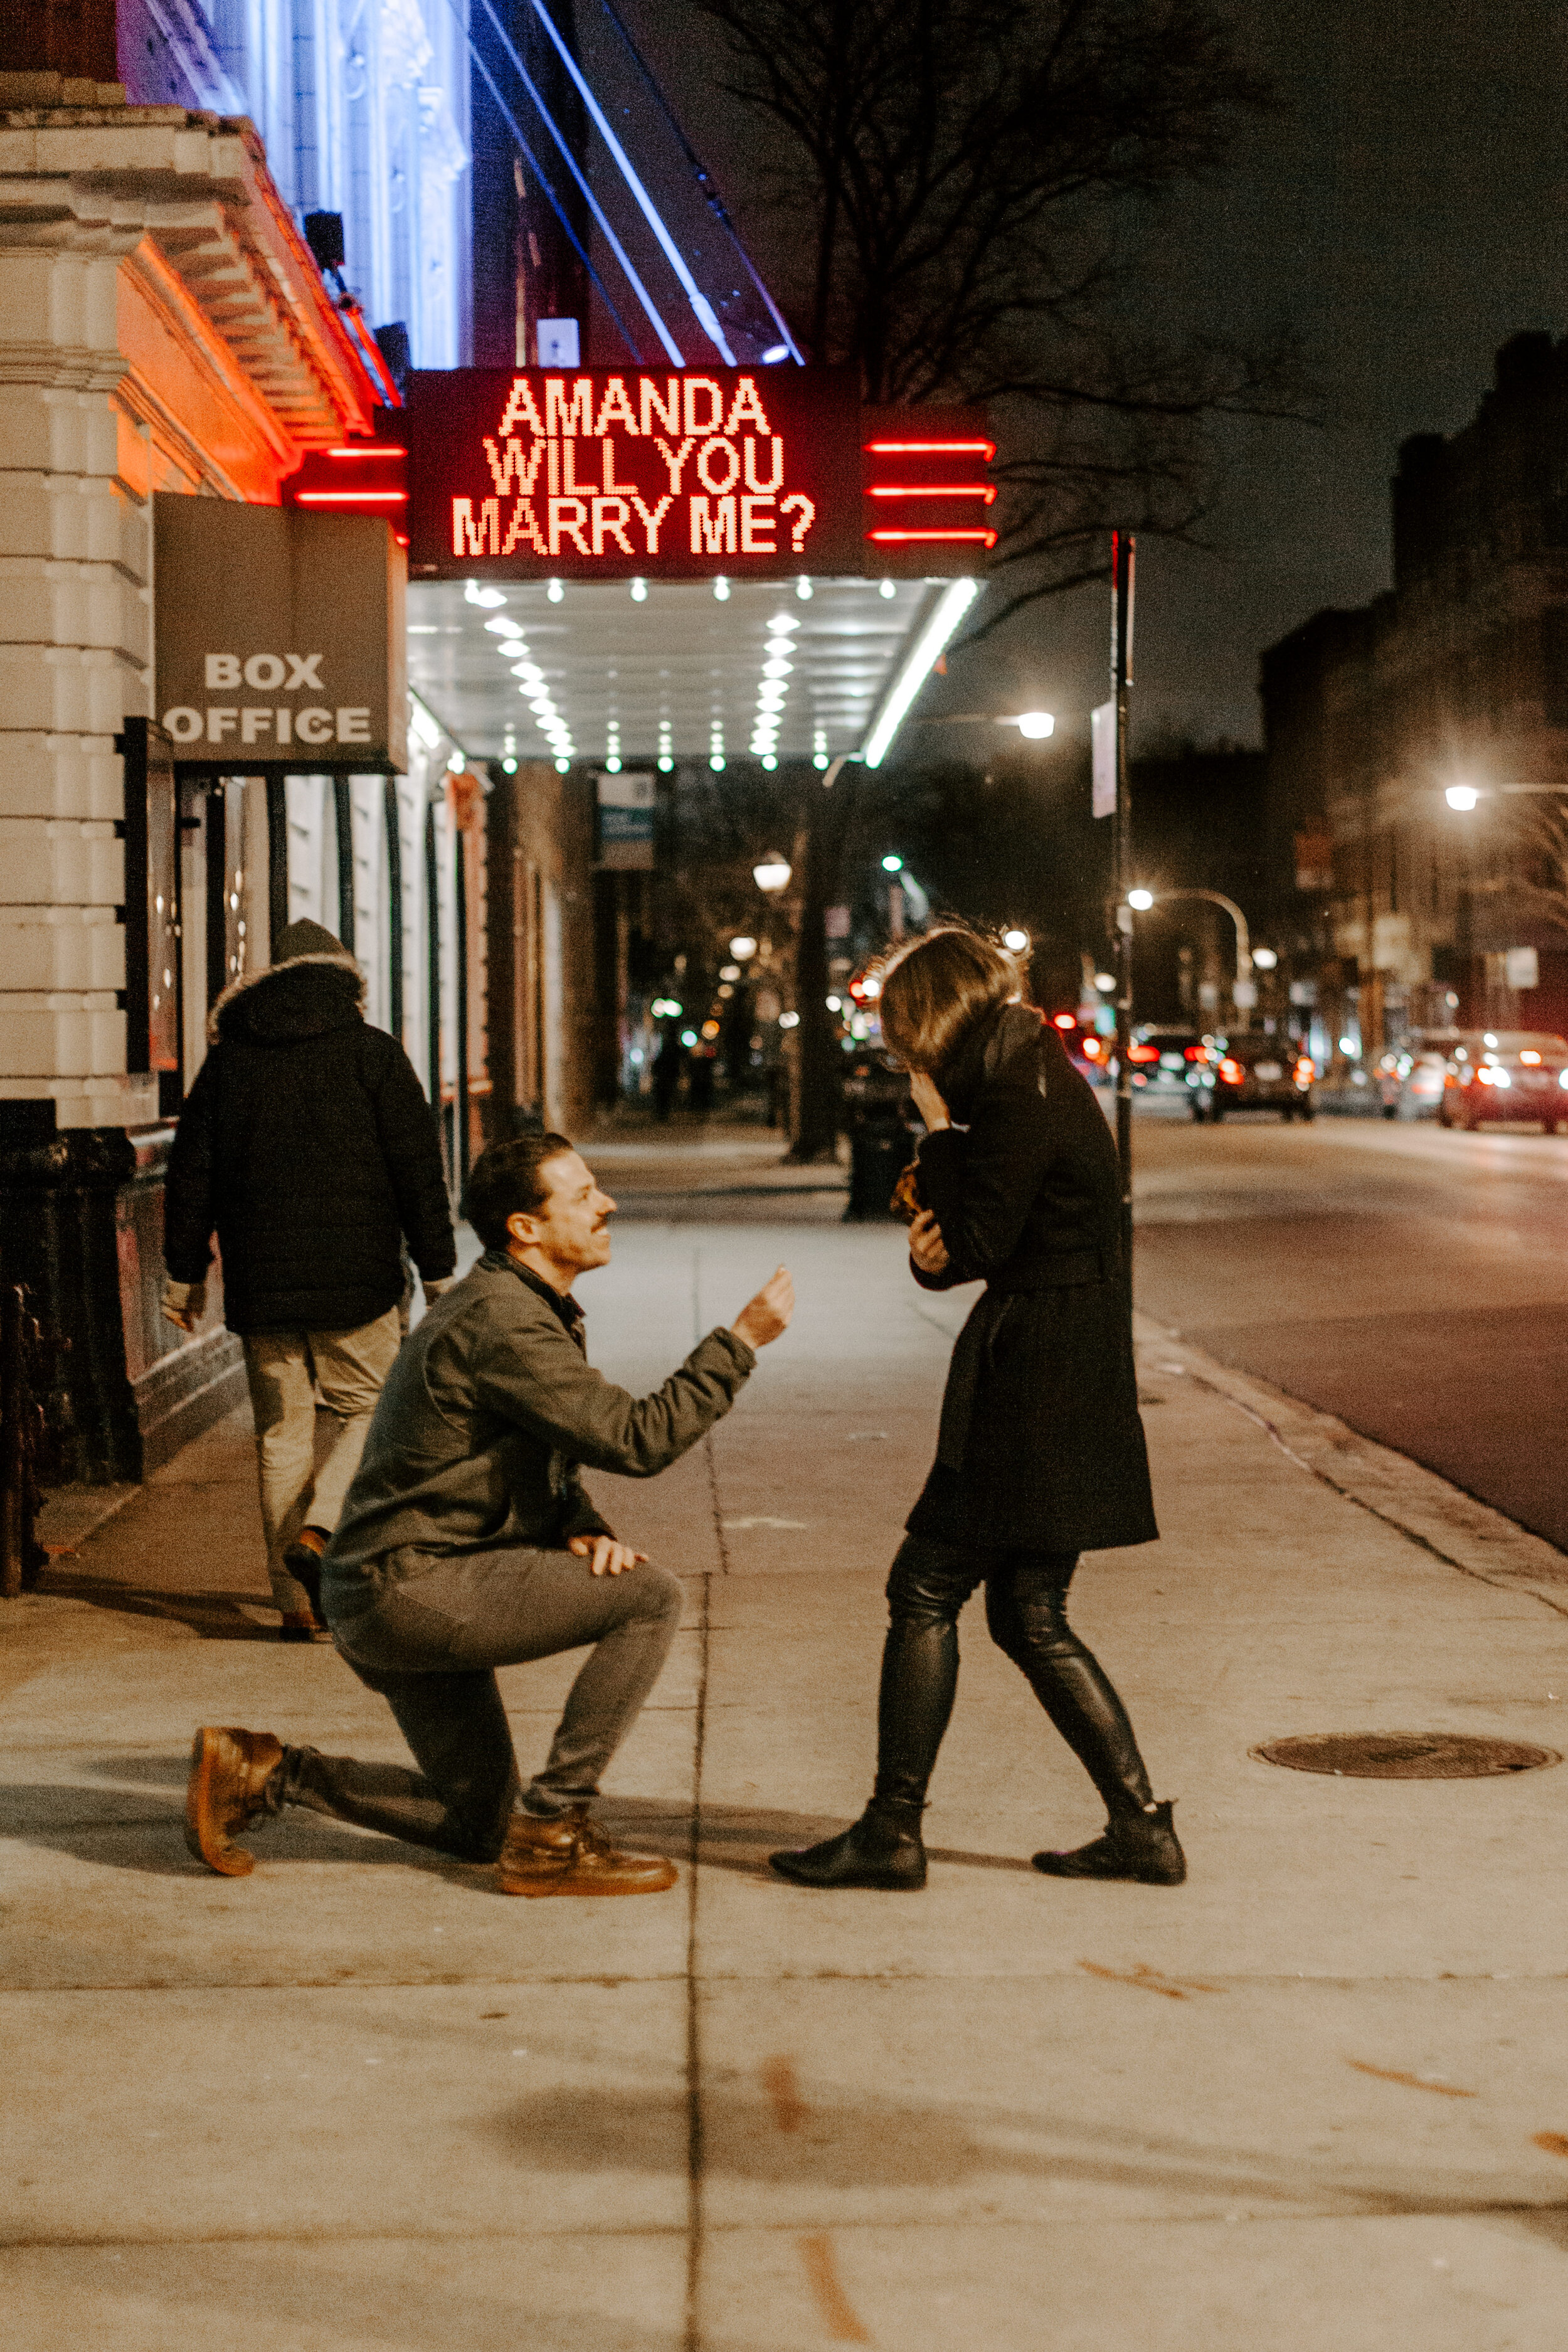  Chicago surprise proposal, woman reacts emotionally as her boyfriend proposes to her on one knee in front of theater marquee reading Amanda Will You Marry Me? Chicago engagement photographer, Lucy B. Photography 